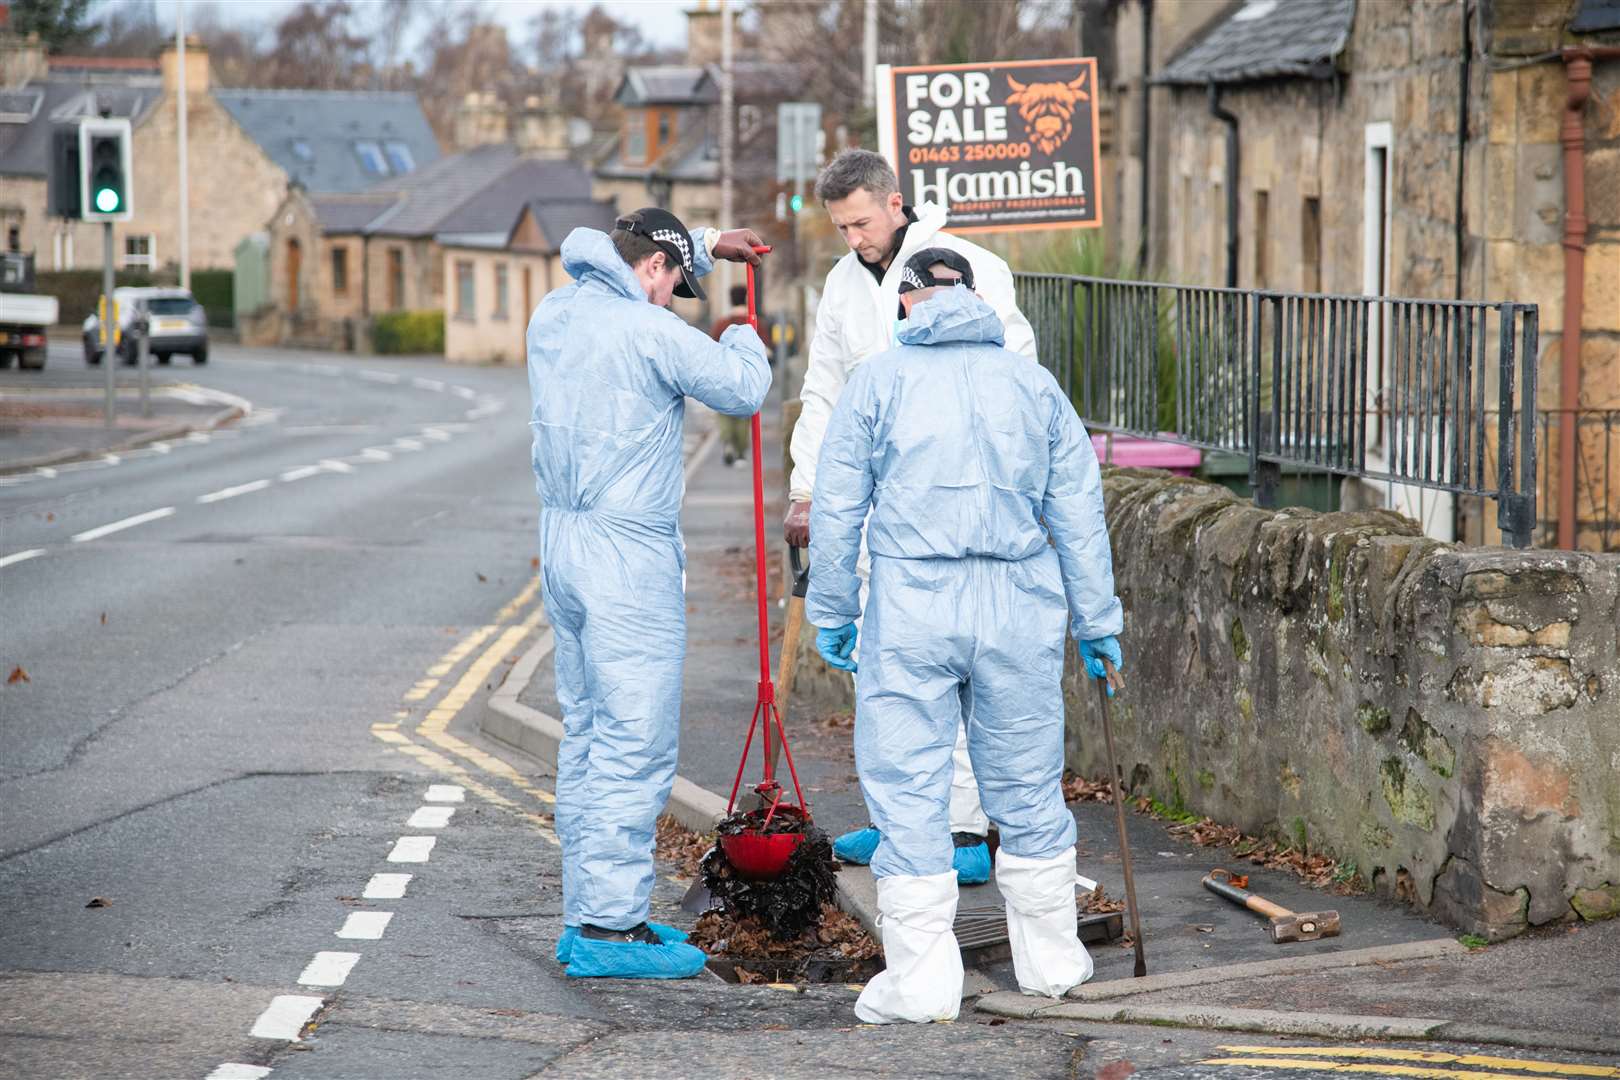 Officers checking drains for evidence last week. Picture: HNMedia